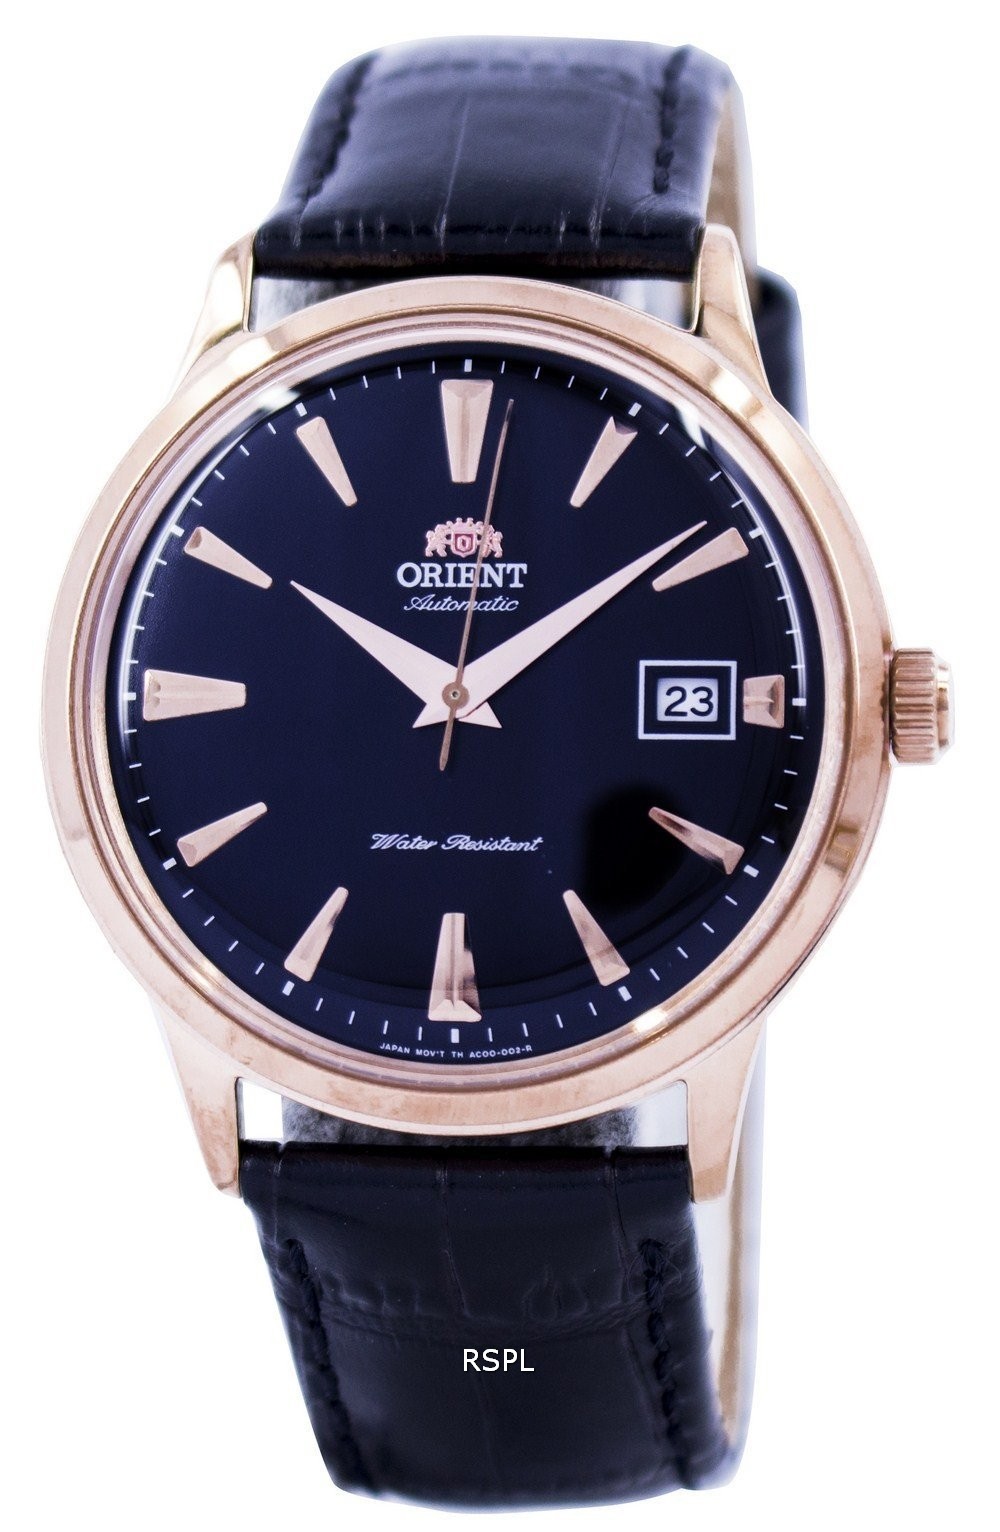 Orient 2nd Generation Bambino Classic Automatic FAC00001B0 AC00001B Men’s Watch.jpg  by creationwatches